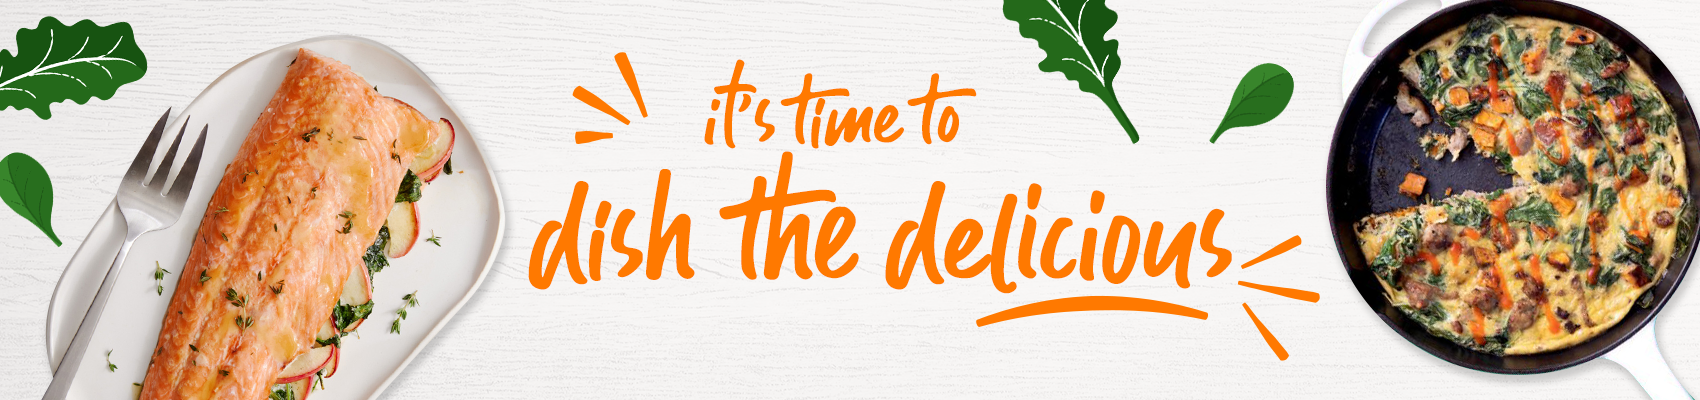 it's time to dish the delicious!